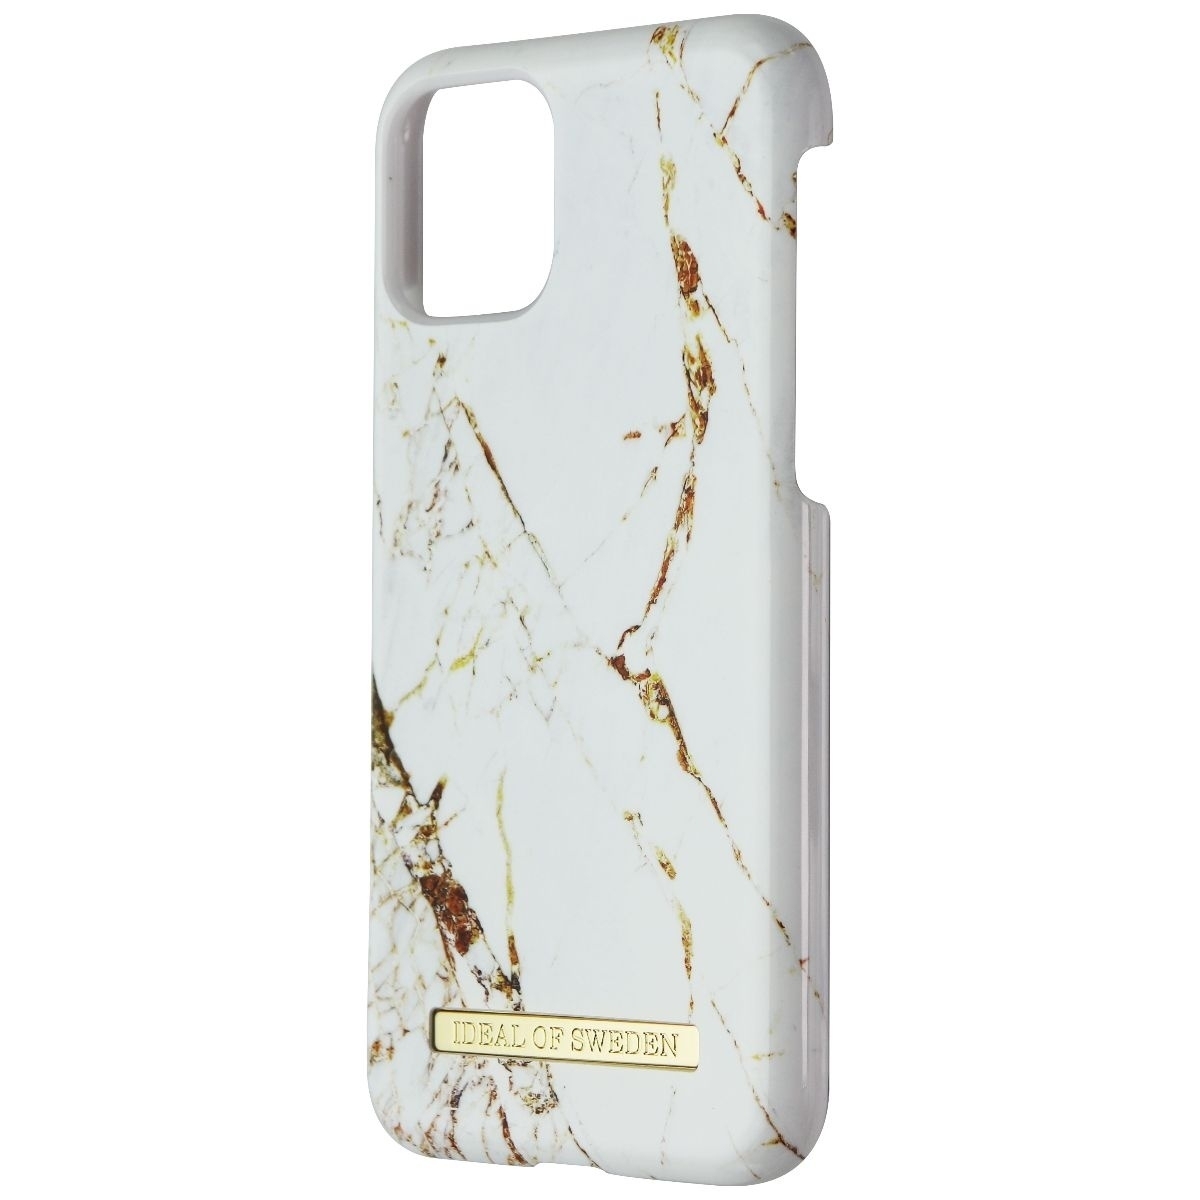 IDeal Of Sweden Hardshell Case For Apple IPhone 11 Pro / Xs / X - Carrara Gold